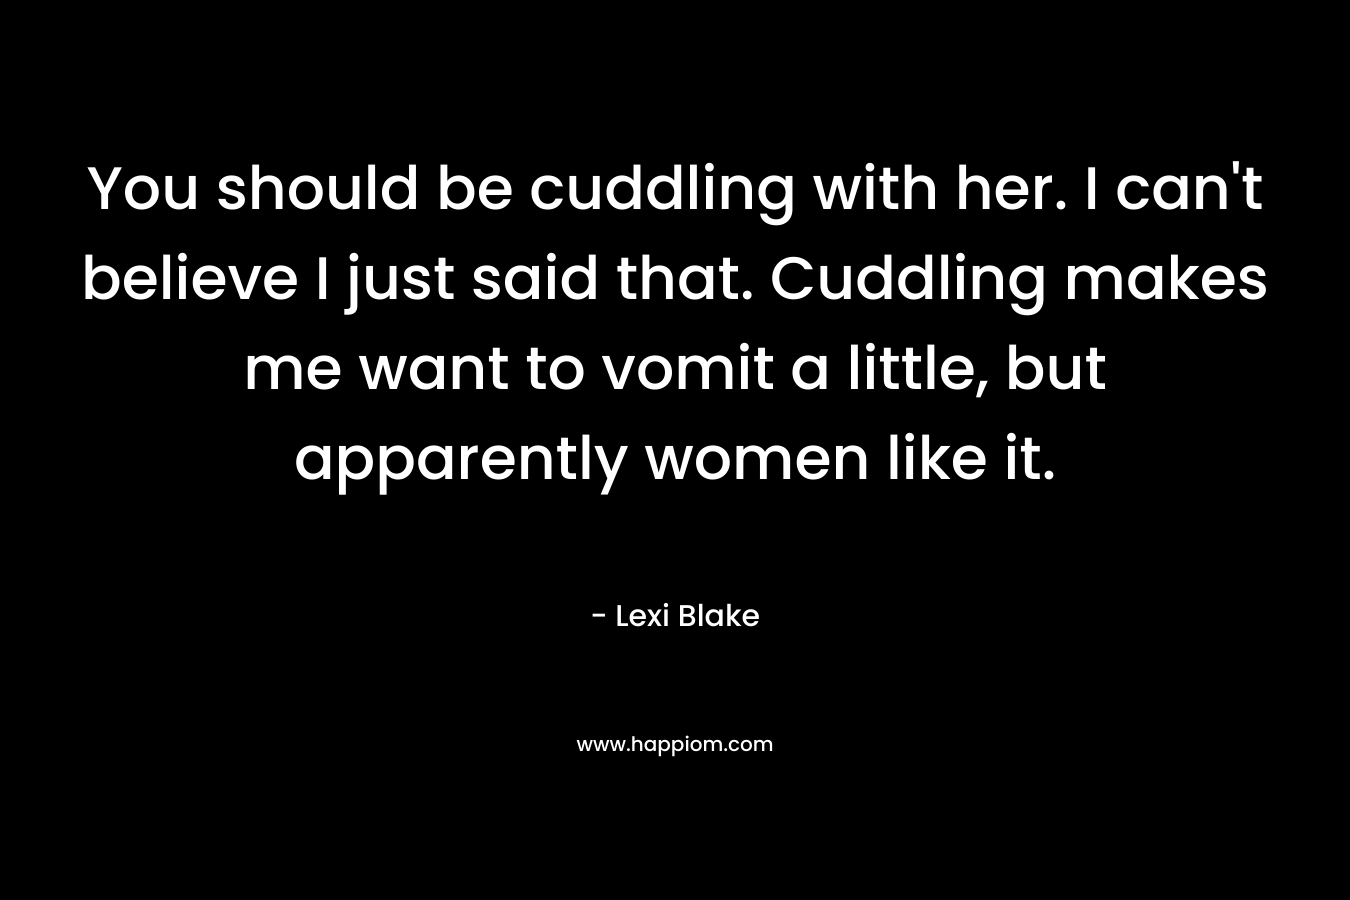 You should be cuddling with her. I can’t believe I just said that. Cuddling makes me want to vomit a little, but apparently women like it. – Lexi Blake